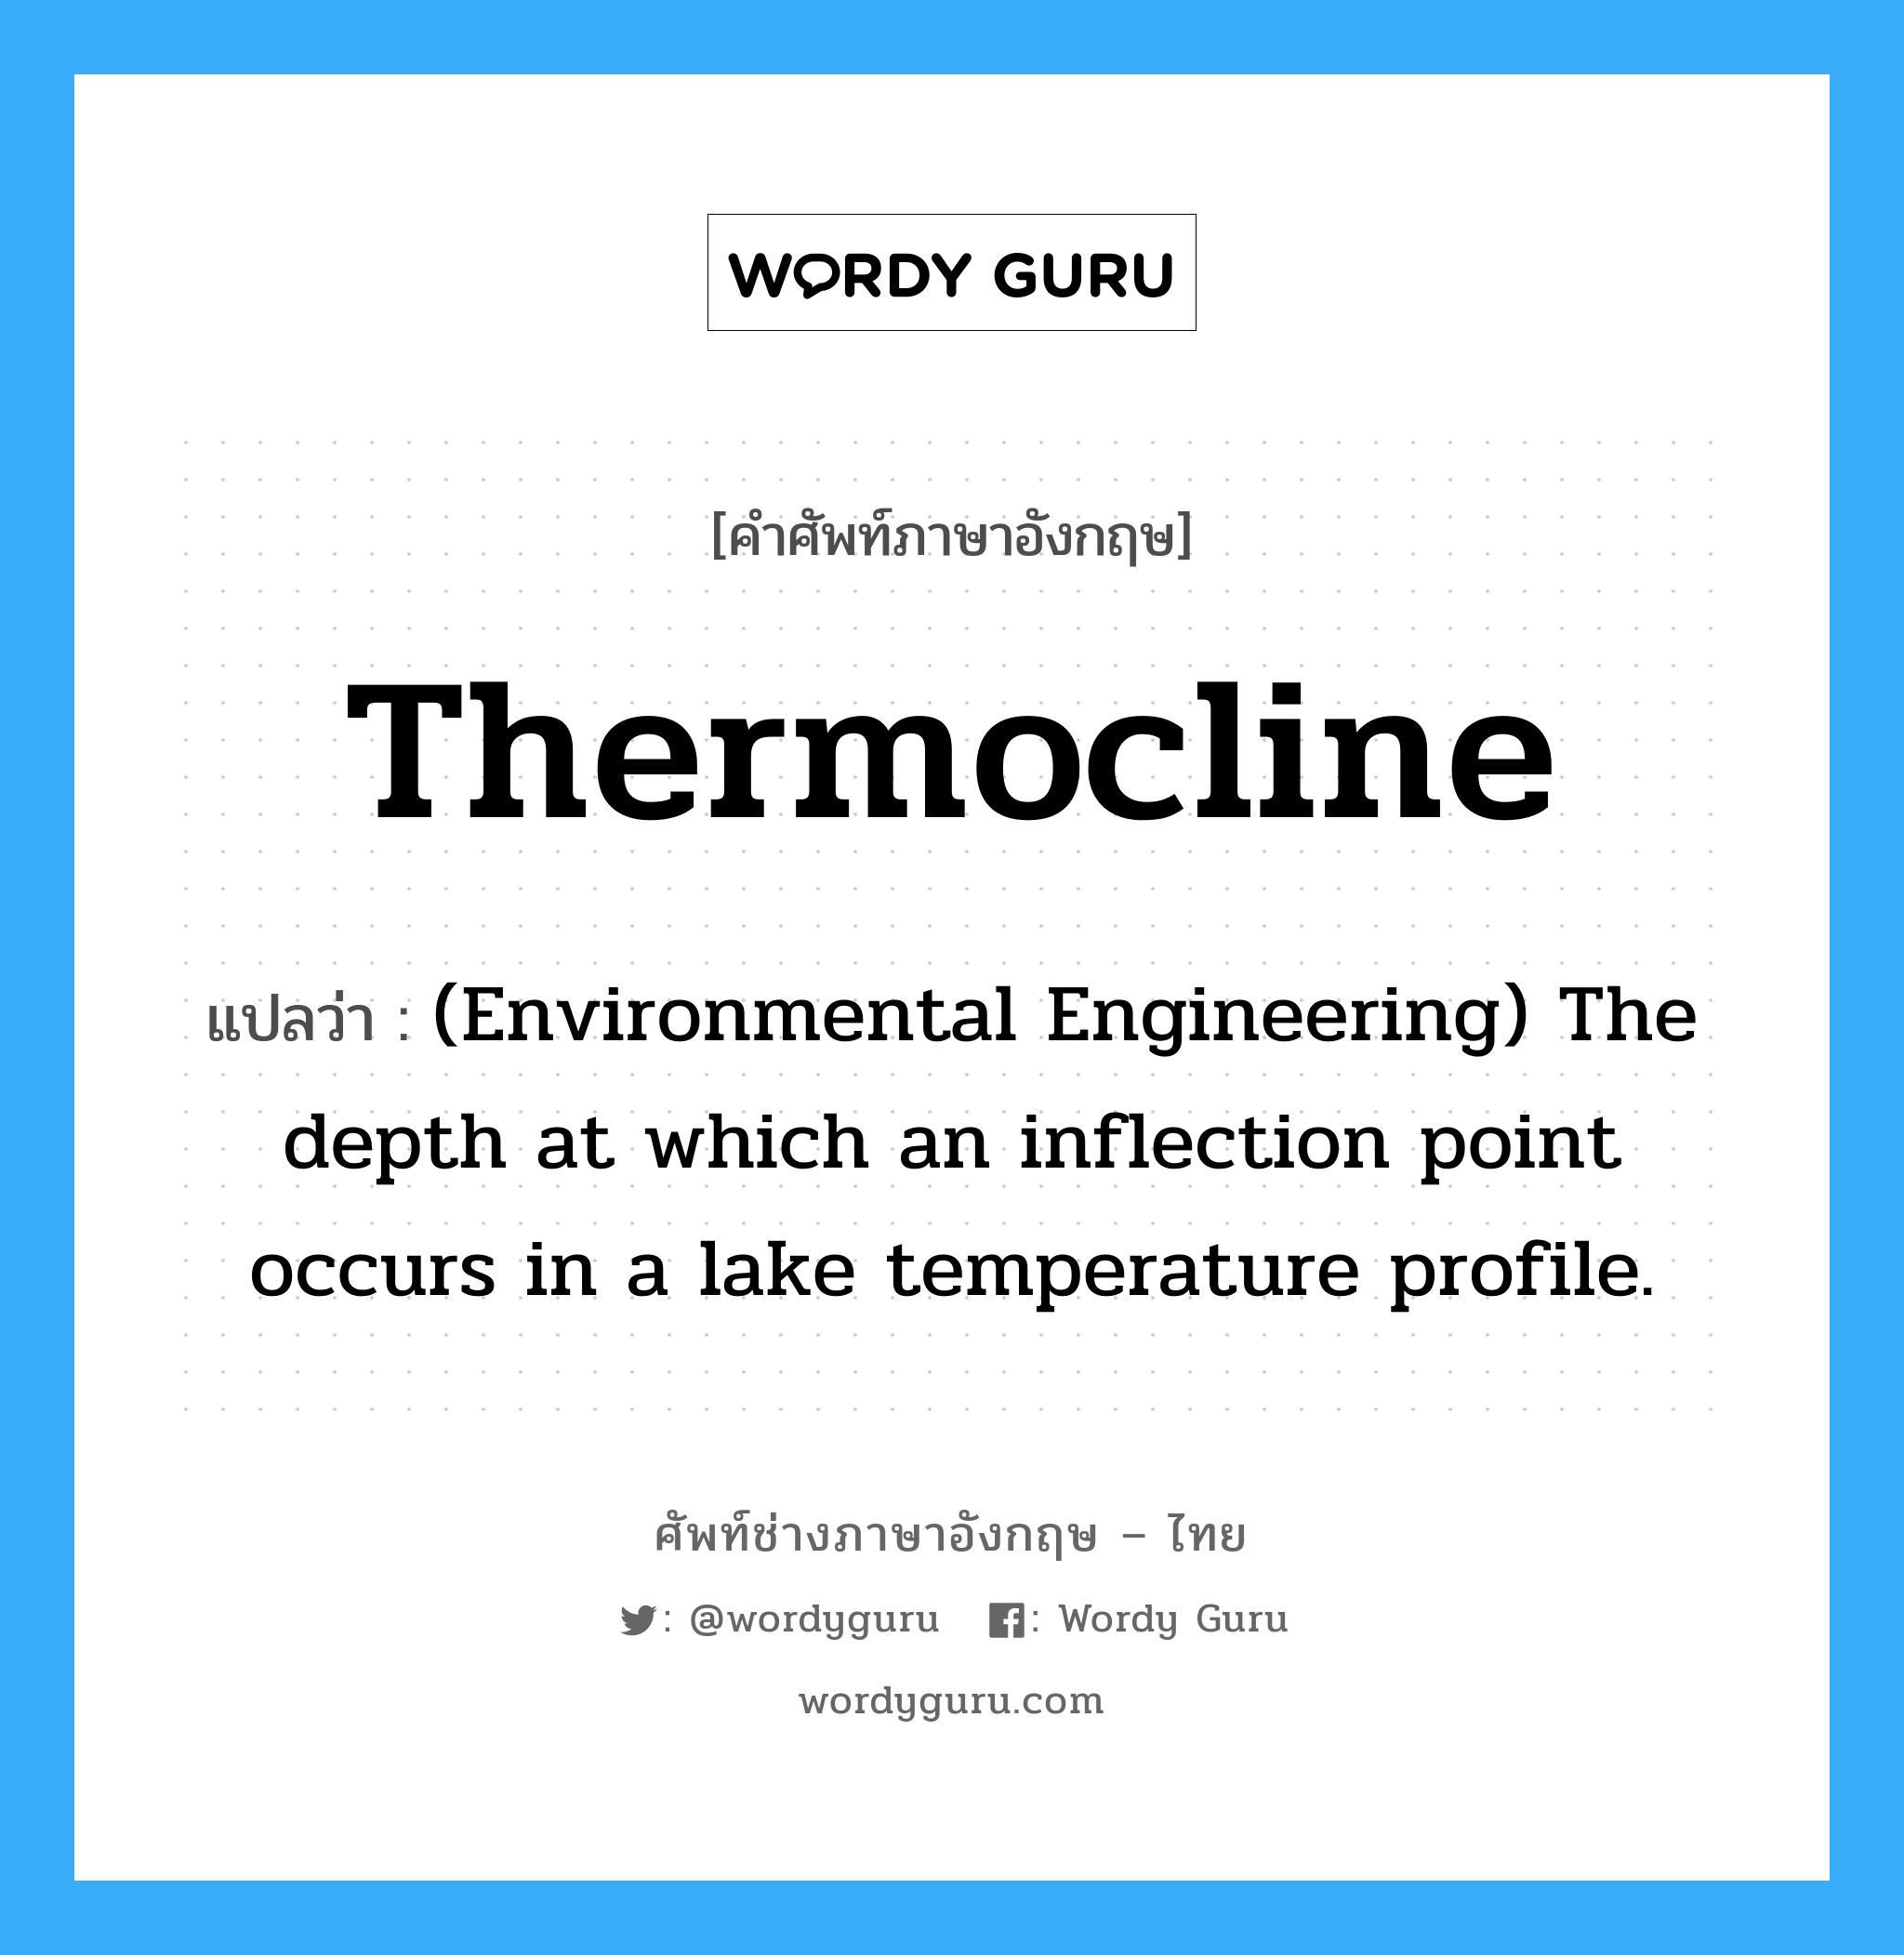 Thermocline แปลว่า?, คำศัพท์ช่างภาษาอังกฤษ - ไทย Thermocline คำศัพท์ภาษาอังกฤษ Thermocline แปลว่า (Environmental Engineering) The depth at which an inflection point occurs in a lake temperature profile.